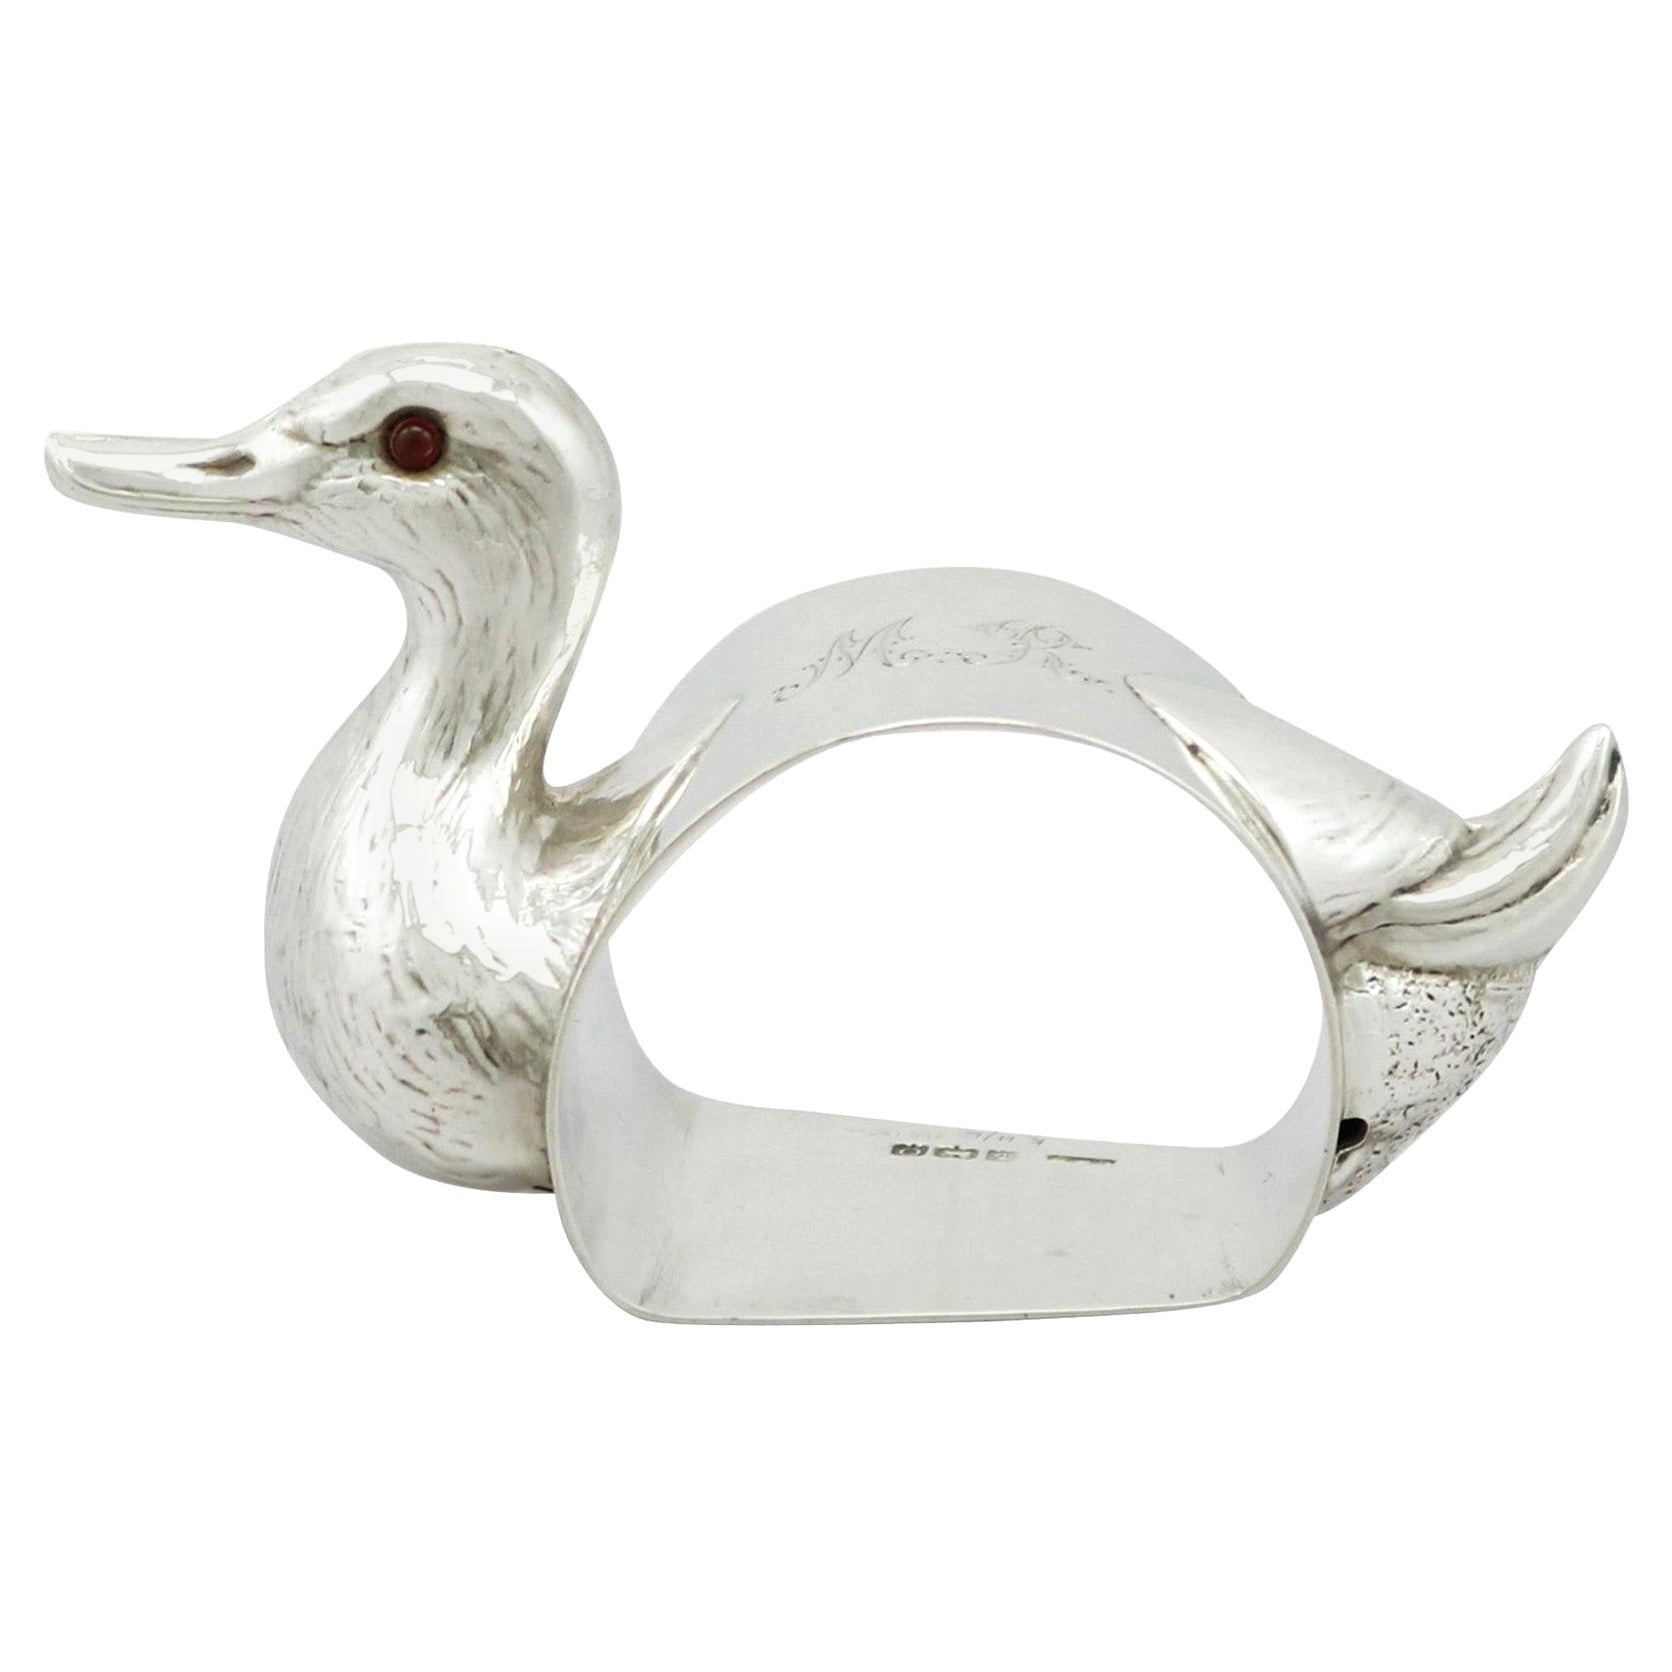 1910s Antique Sterling Silver Duck Napkin Ring